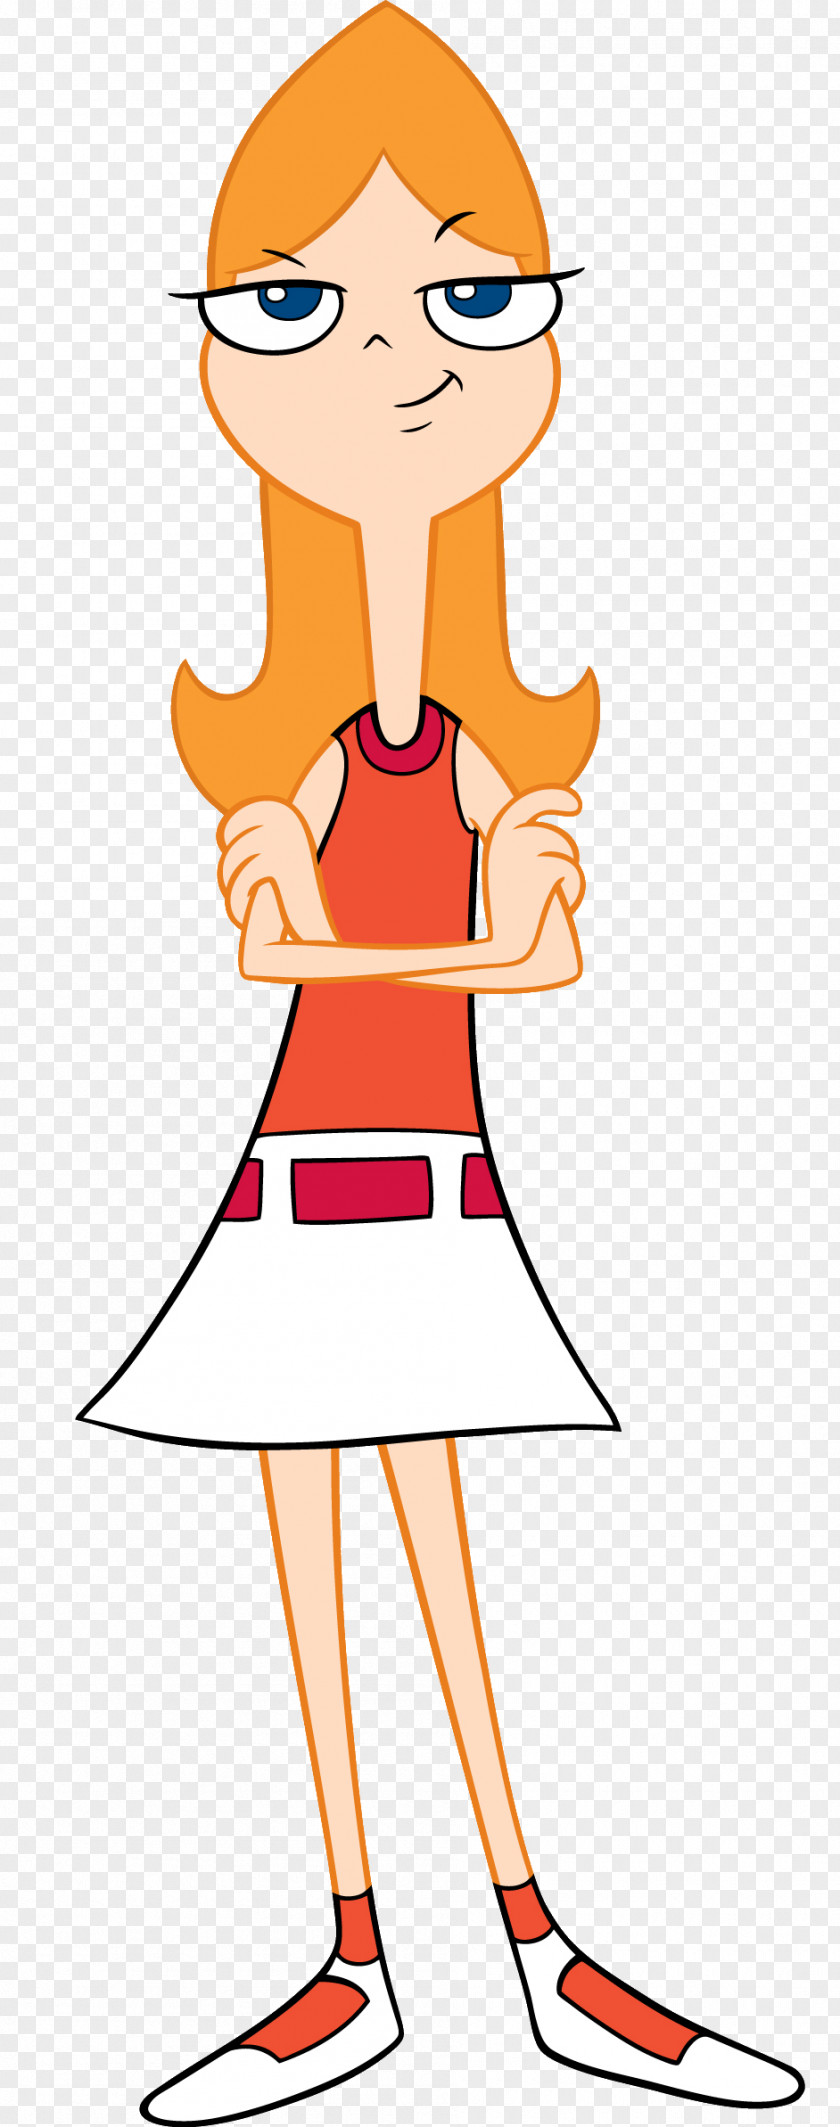 Milo Candace Flynn Ferb Fletcher Phineas Character Disney Channel PNG